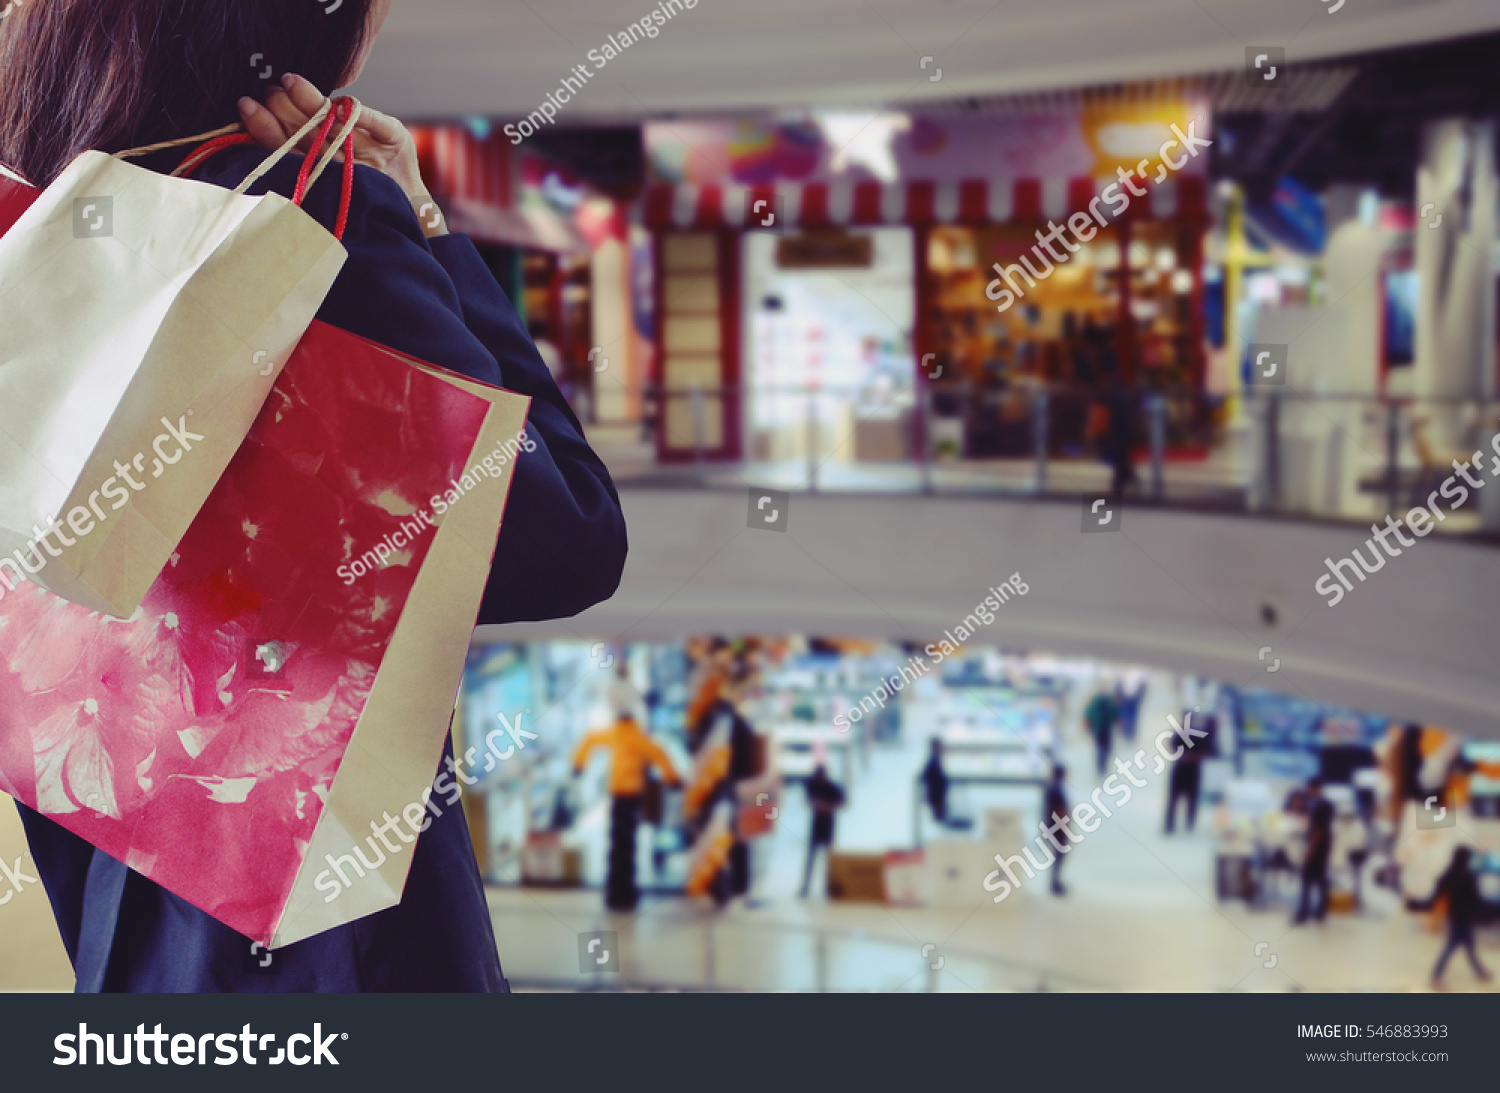 Woman holding shopping bags in the shopping mall
 #546883993